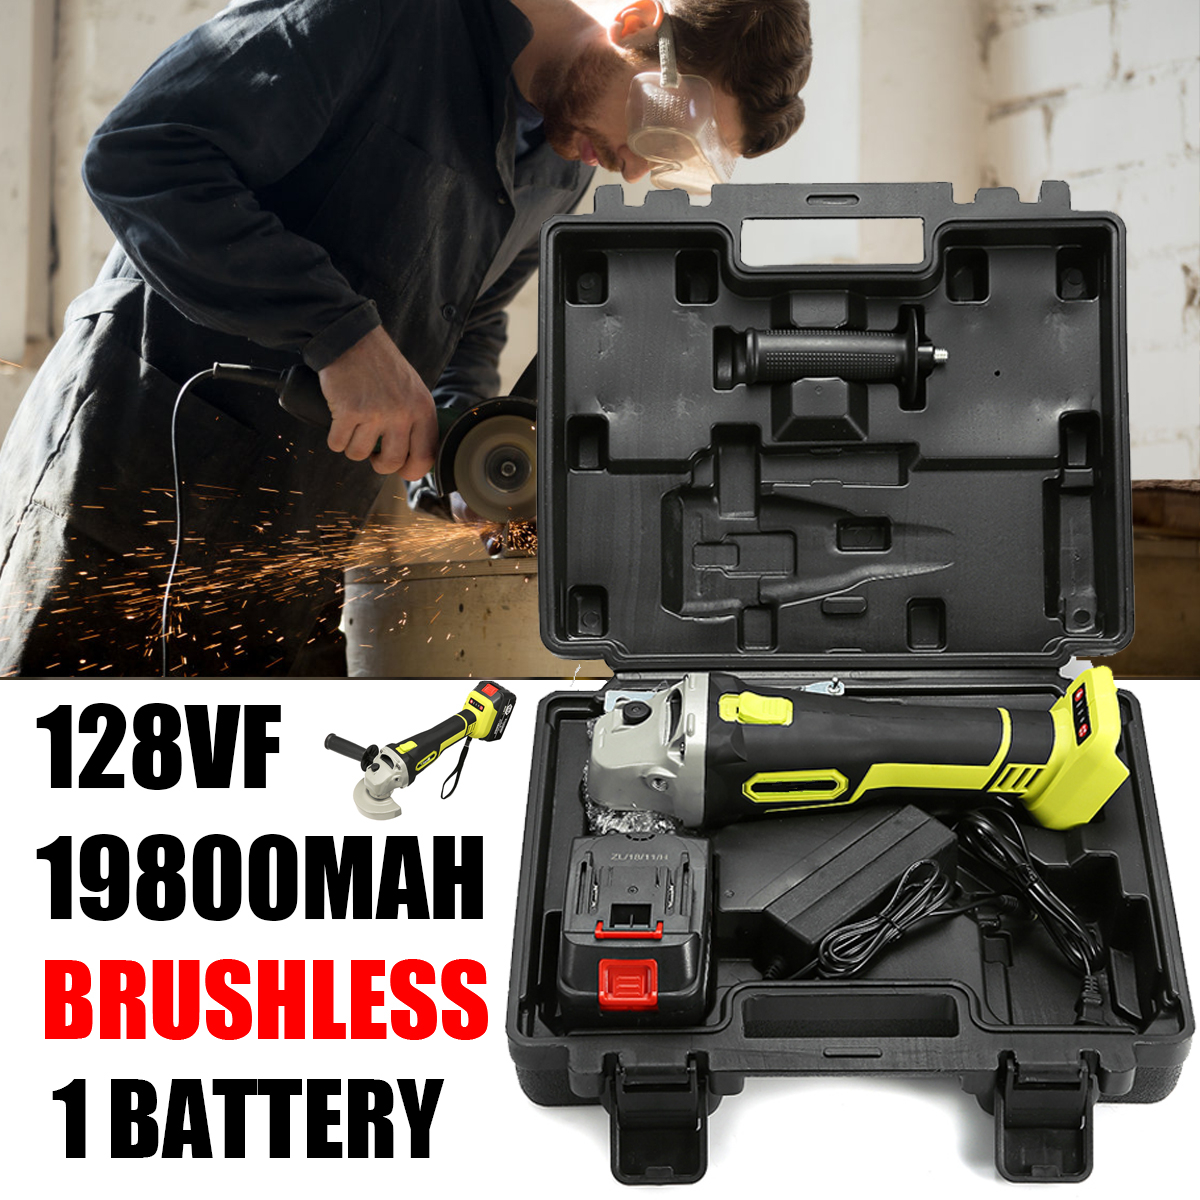 128VF-19800mAh-Lithium-Ion-Brushless-Cut-Off-Angle-Grinder-Cordless-Electric-Angle-Grinder-Power-Cut-1397283-1